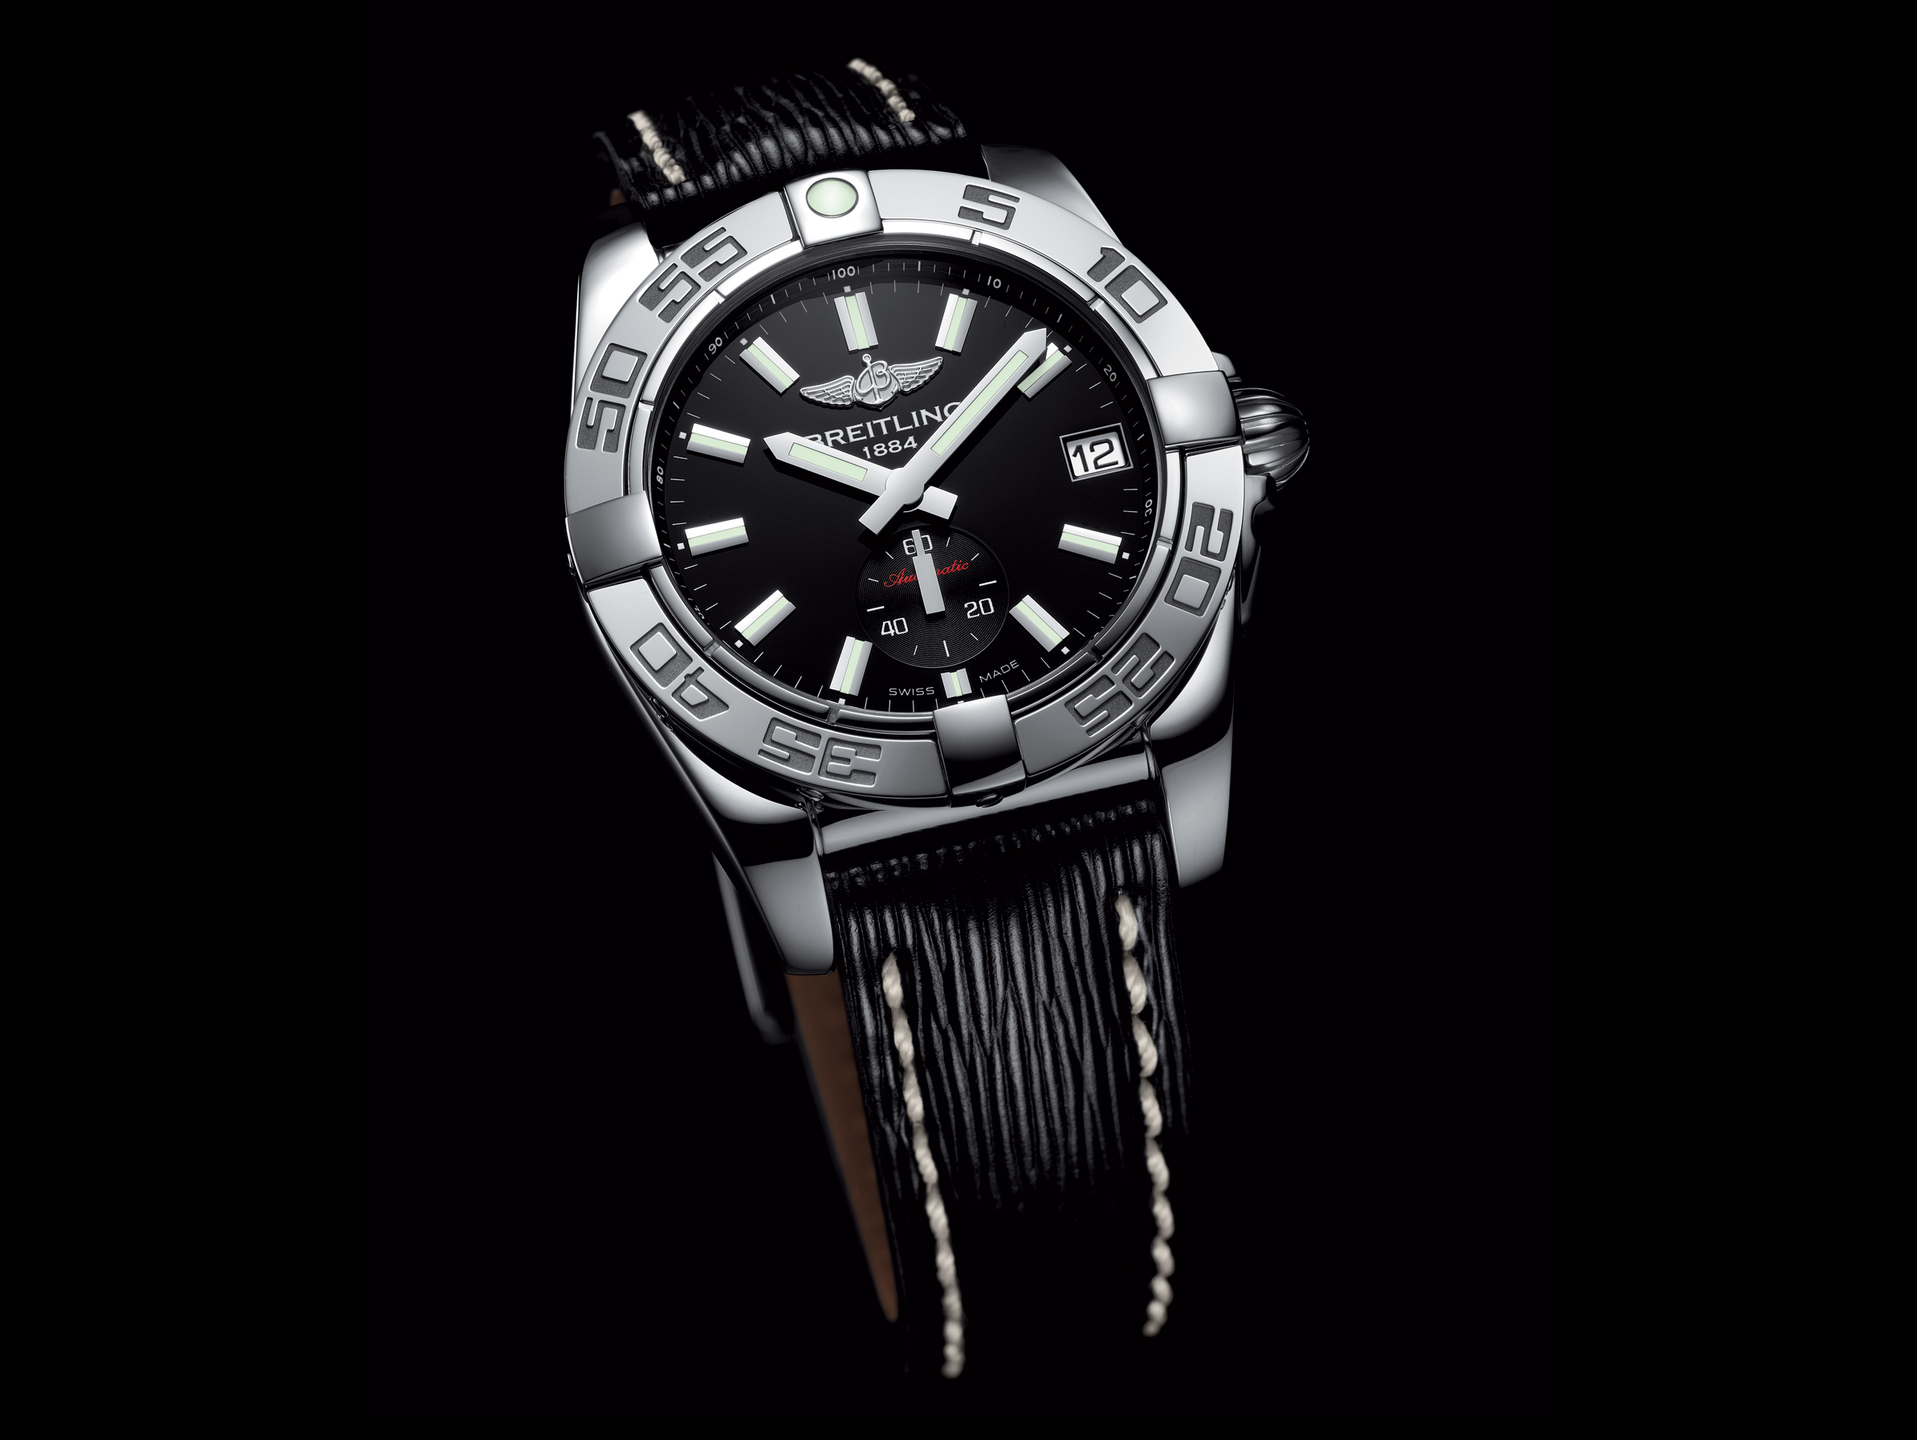 Breitling Ocean GMT Reference: A32360 - Limited Edition - Wimpeybreitling Supergeat greenwich Mean Time